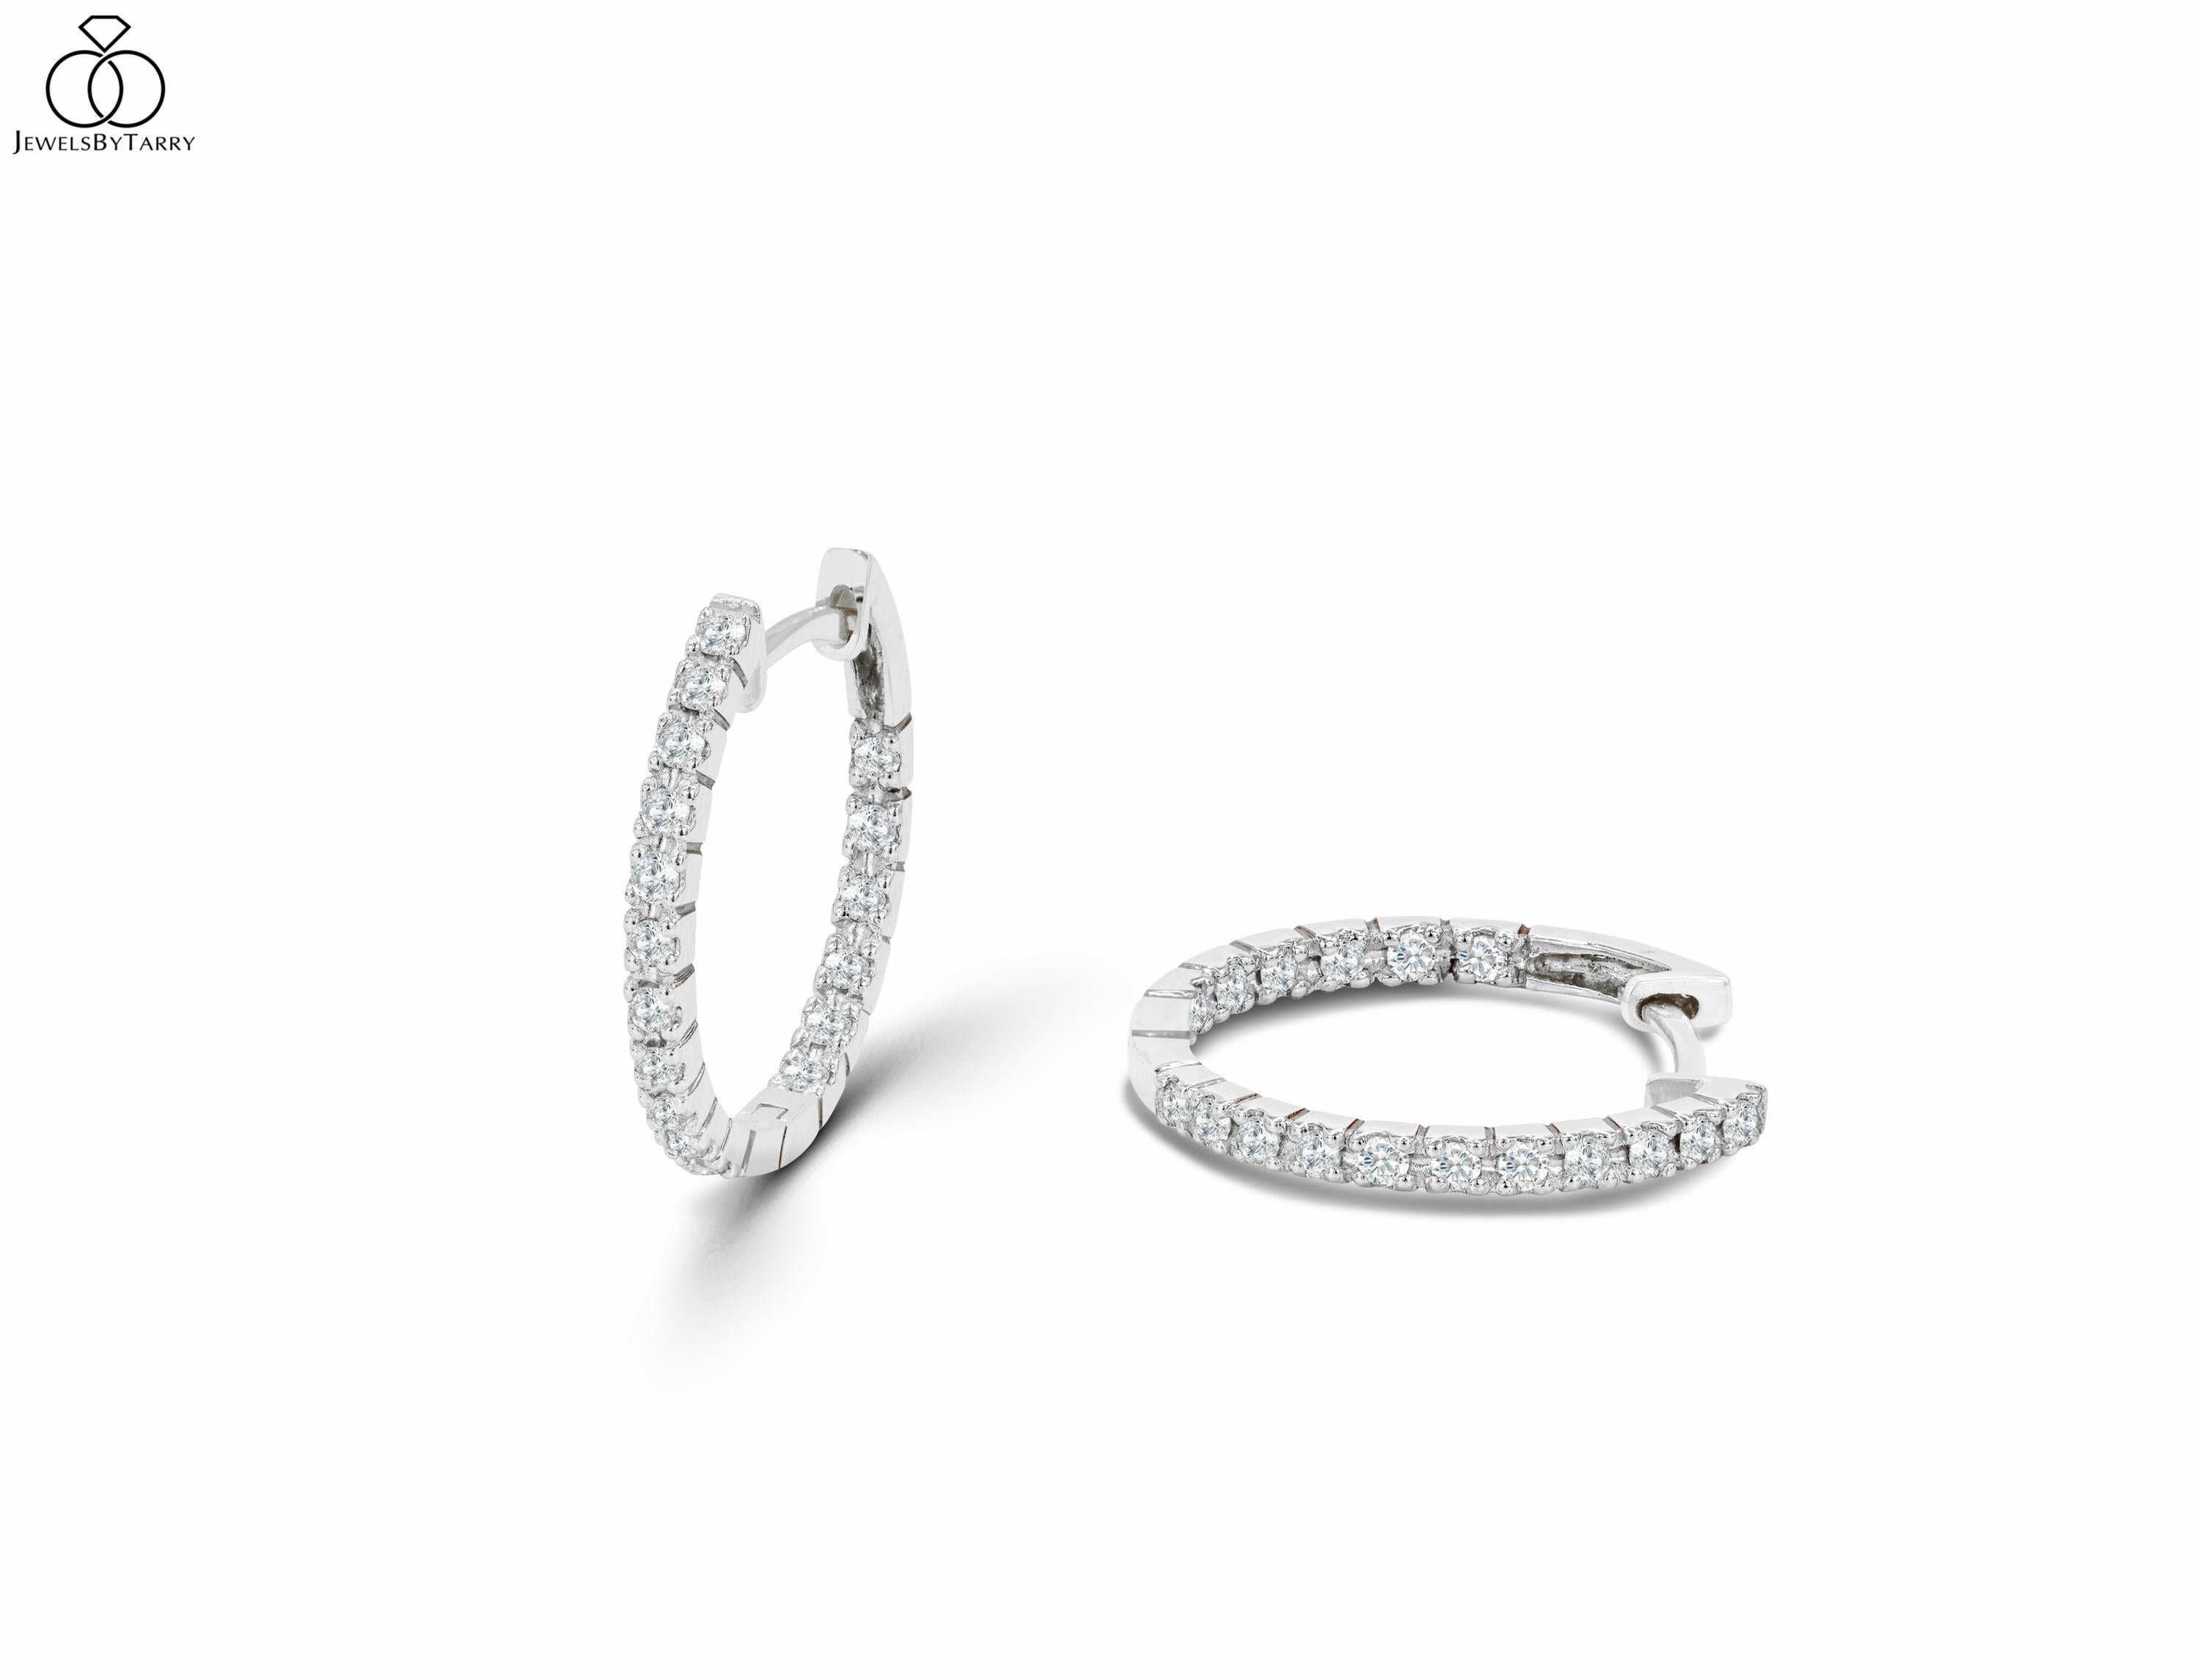 Diamond Hoop Earrings are made of 14K solid gold available in three colors of gold, White Gold / Rose Gold / Yellow Gold.

Classic Pave Diamond Hoop Earrings set in 14K gold. 18 mm. hoop earrings perfect by itself or paired with other earrings.